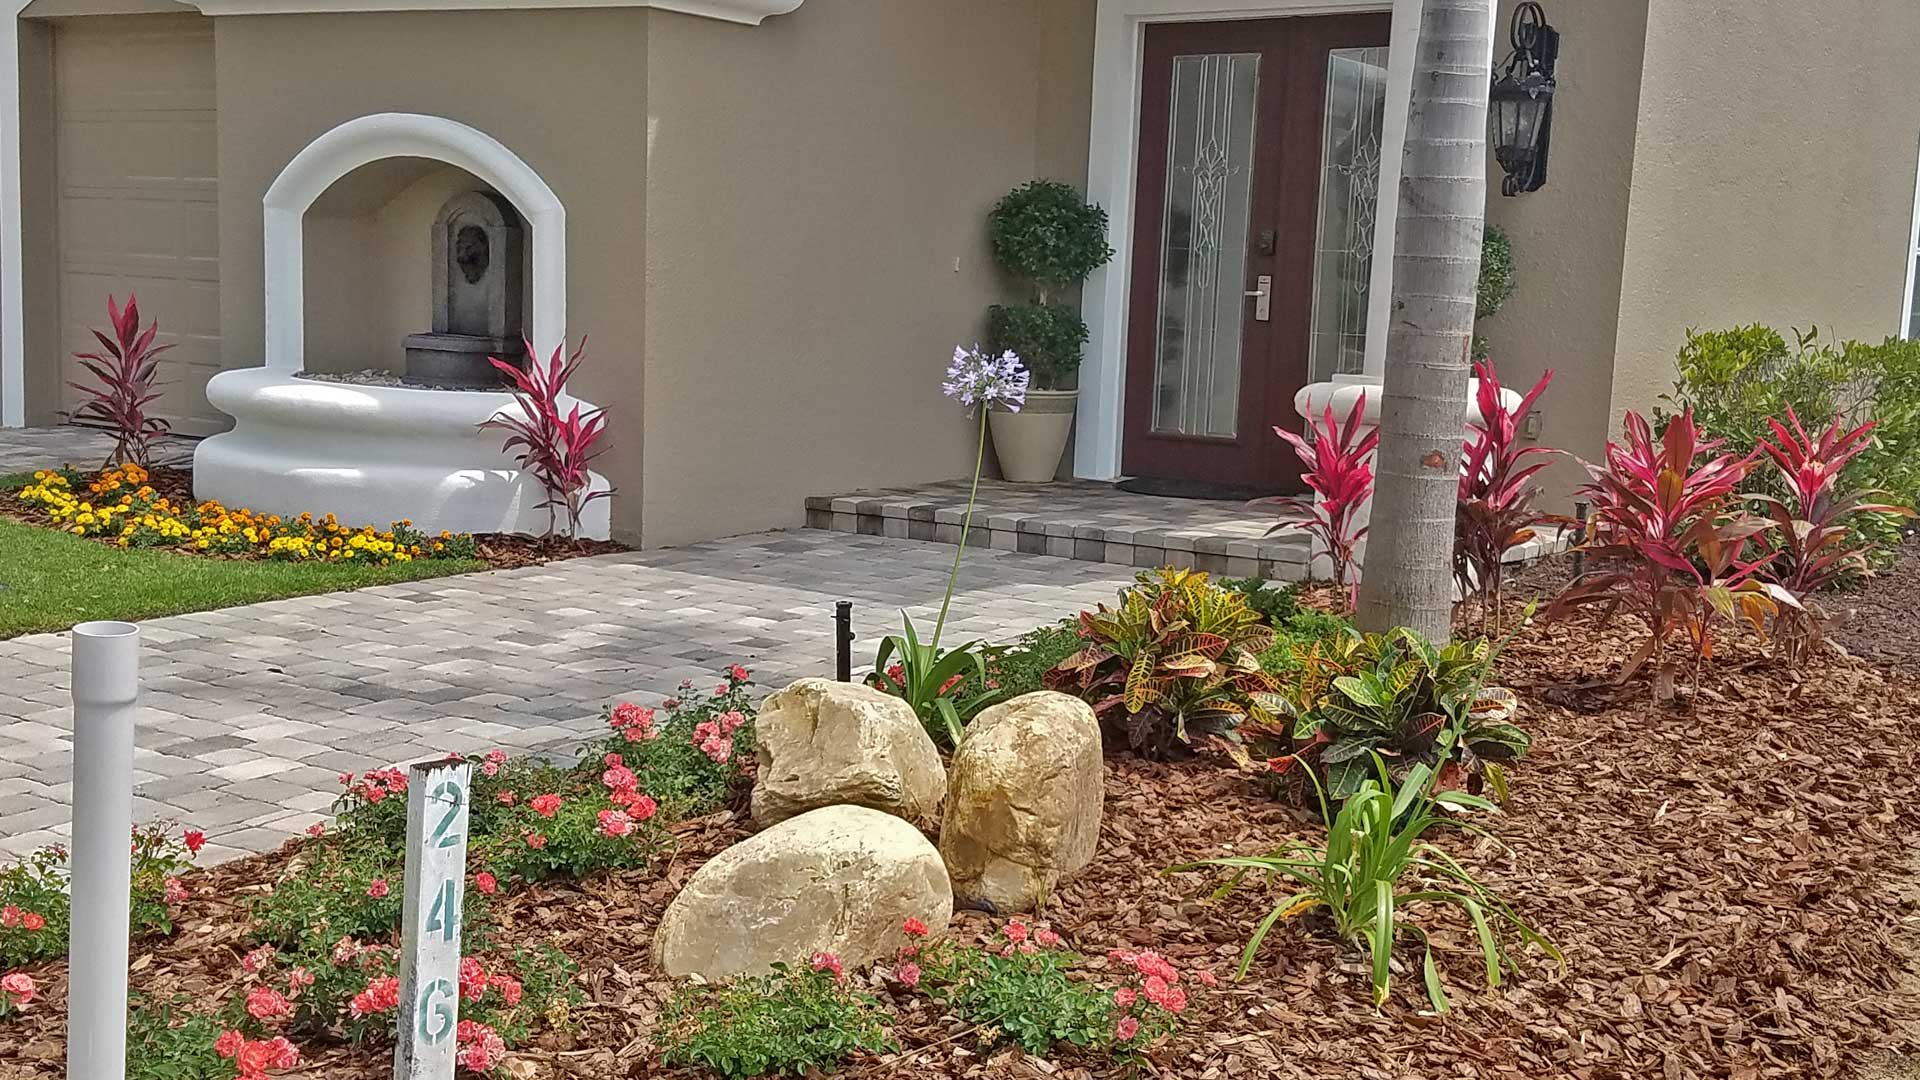 New landscaping design and installation at a home in Auburndale, FL.